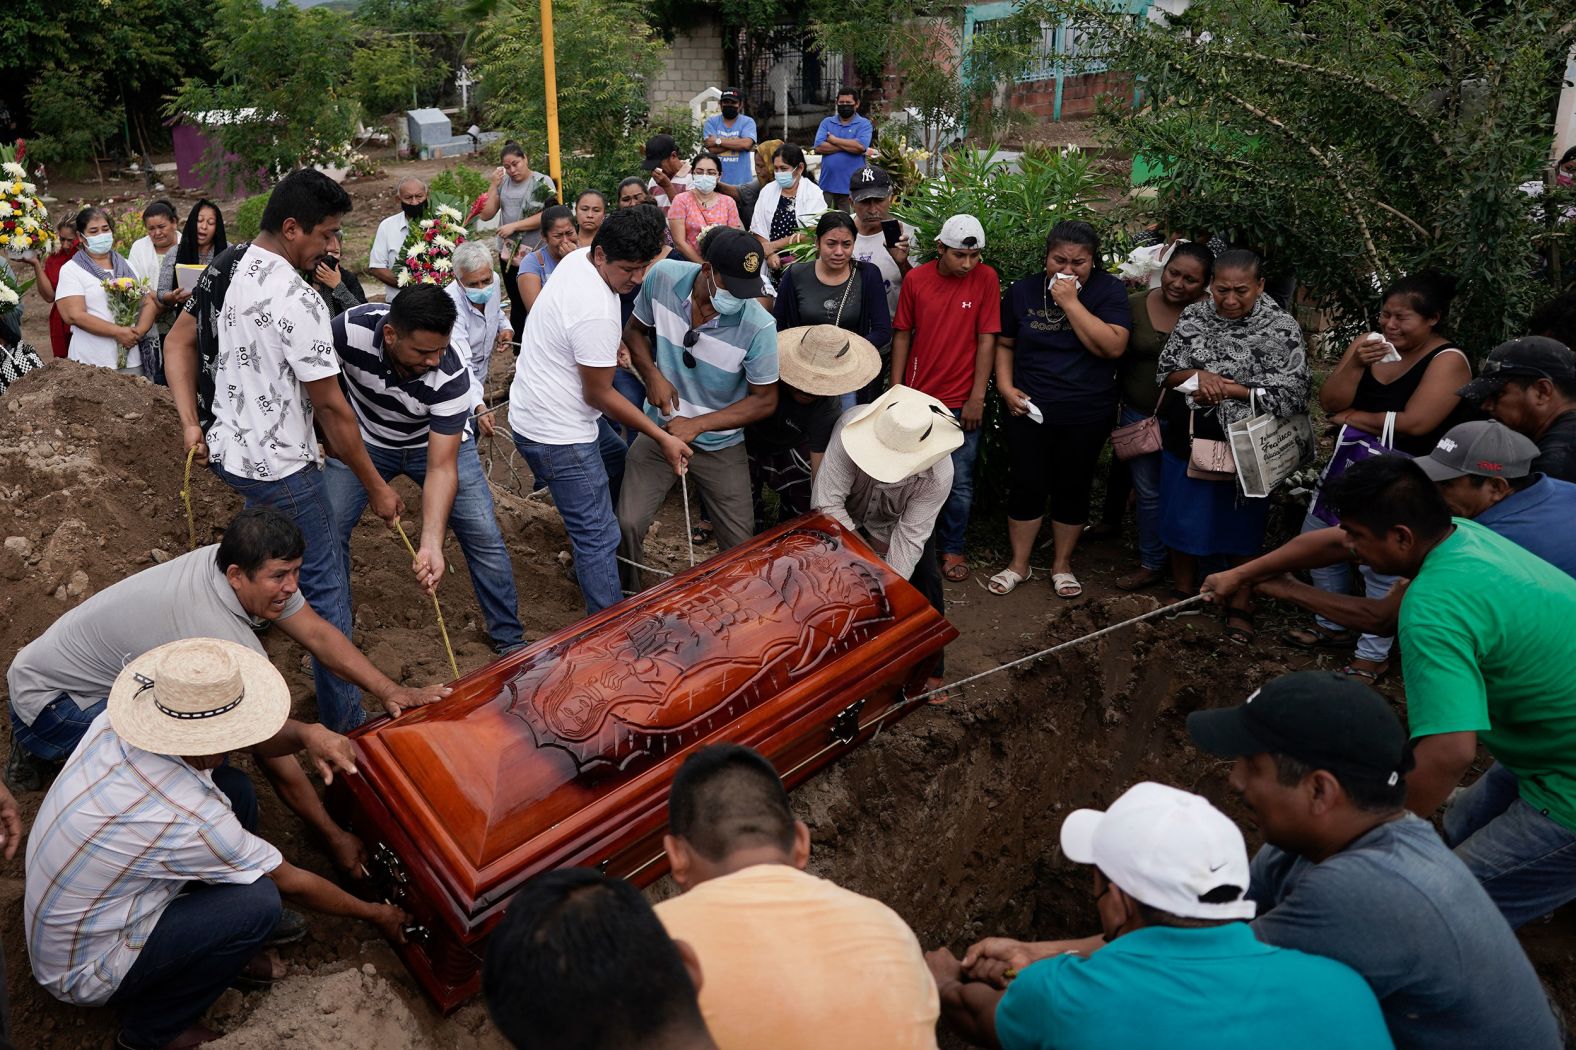 Residents bury Wilmer Rojas on Thursday, October 6, the day after he was killed in <a href="https://cnnespanol.cnn.com/2022/10/05/mexico-ataquel-alcalde-san-miguel-totolapan-conrado-mendoza-almeda-guerrero-orix/" target="_blank">a mass shooting</a> in San Miguel Totolapan, Mexico. Armed civilians entered the town's city hall and shot to death at least 18 people, including the mayor, officials said.